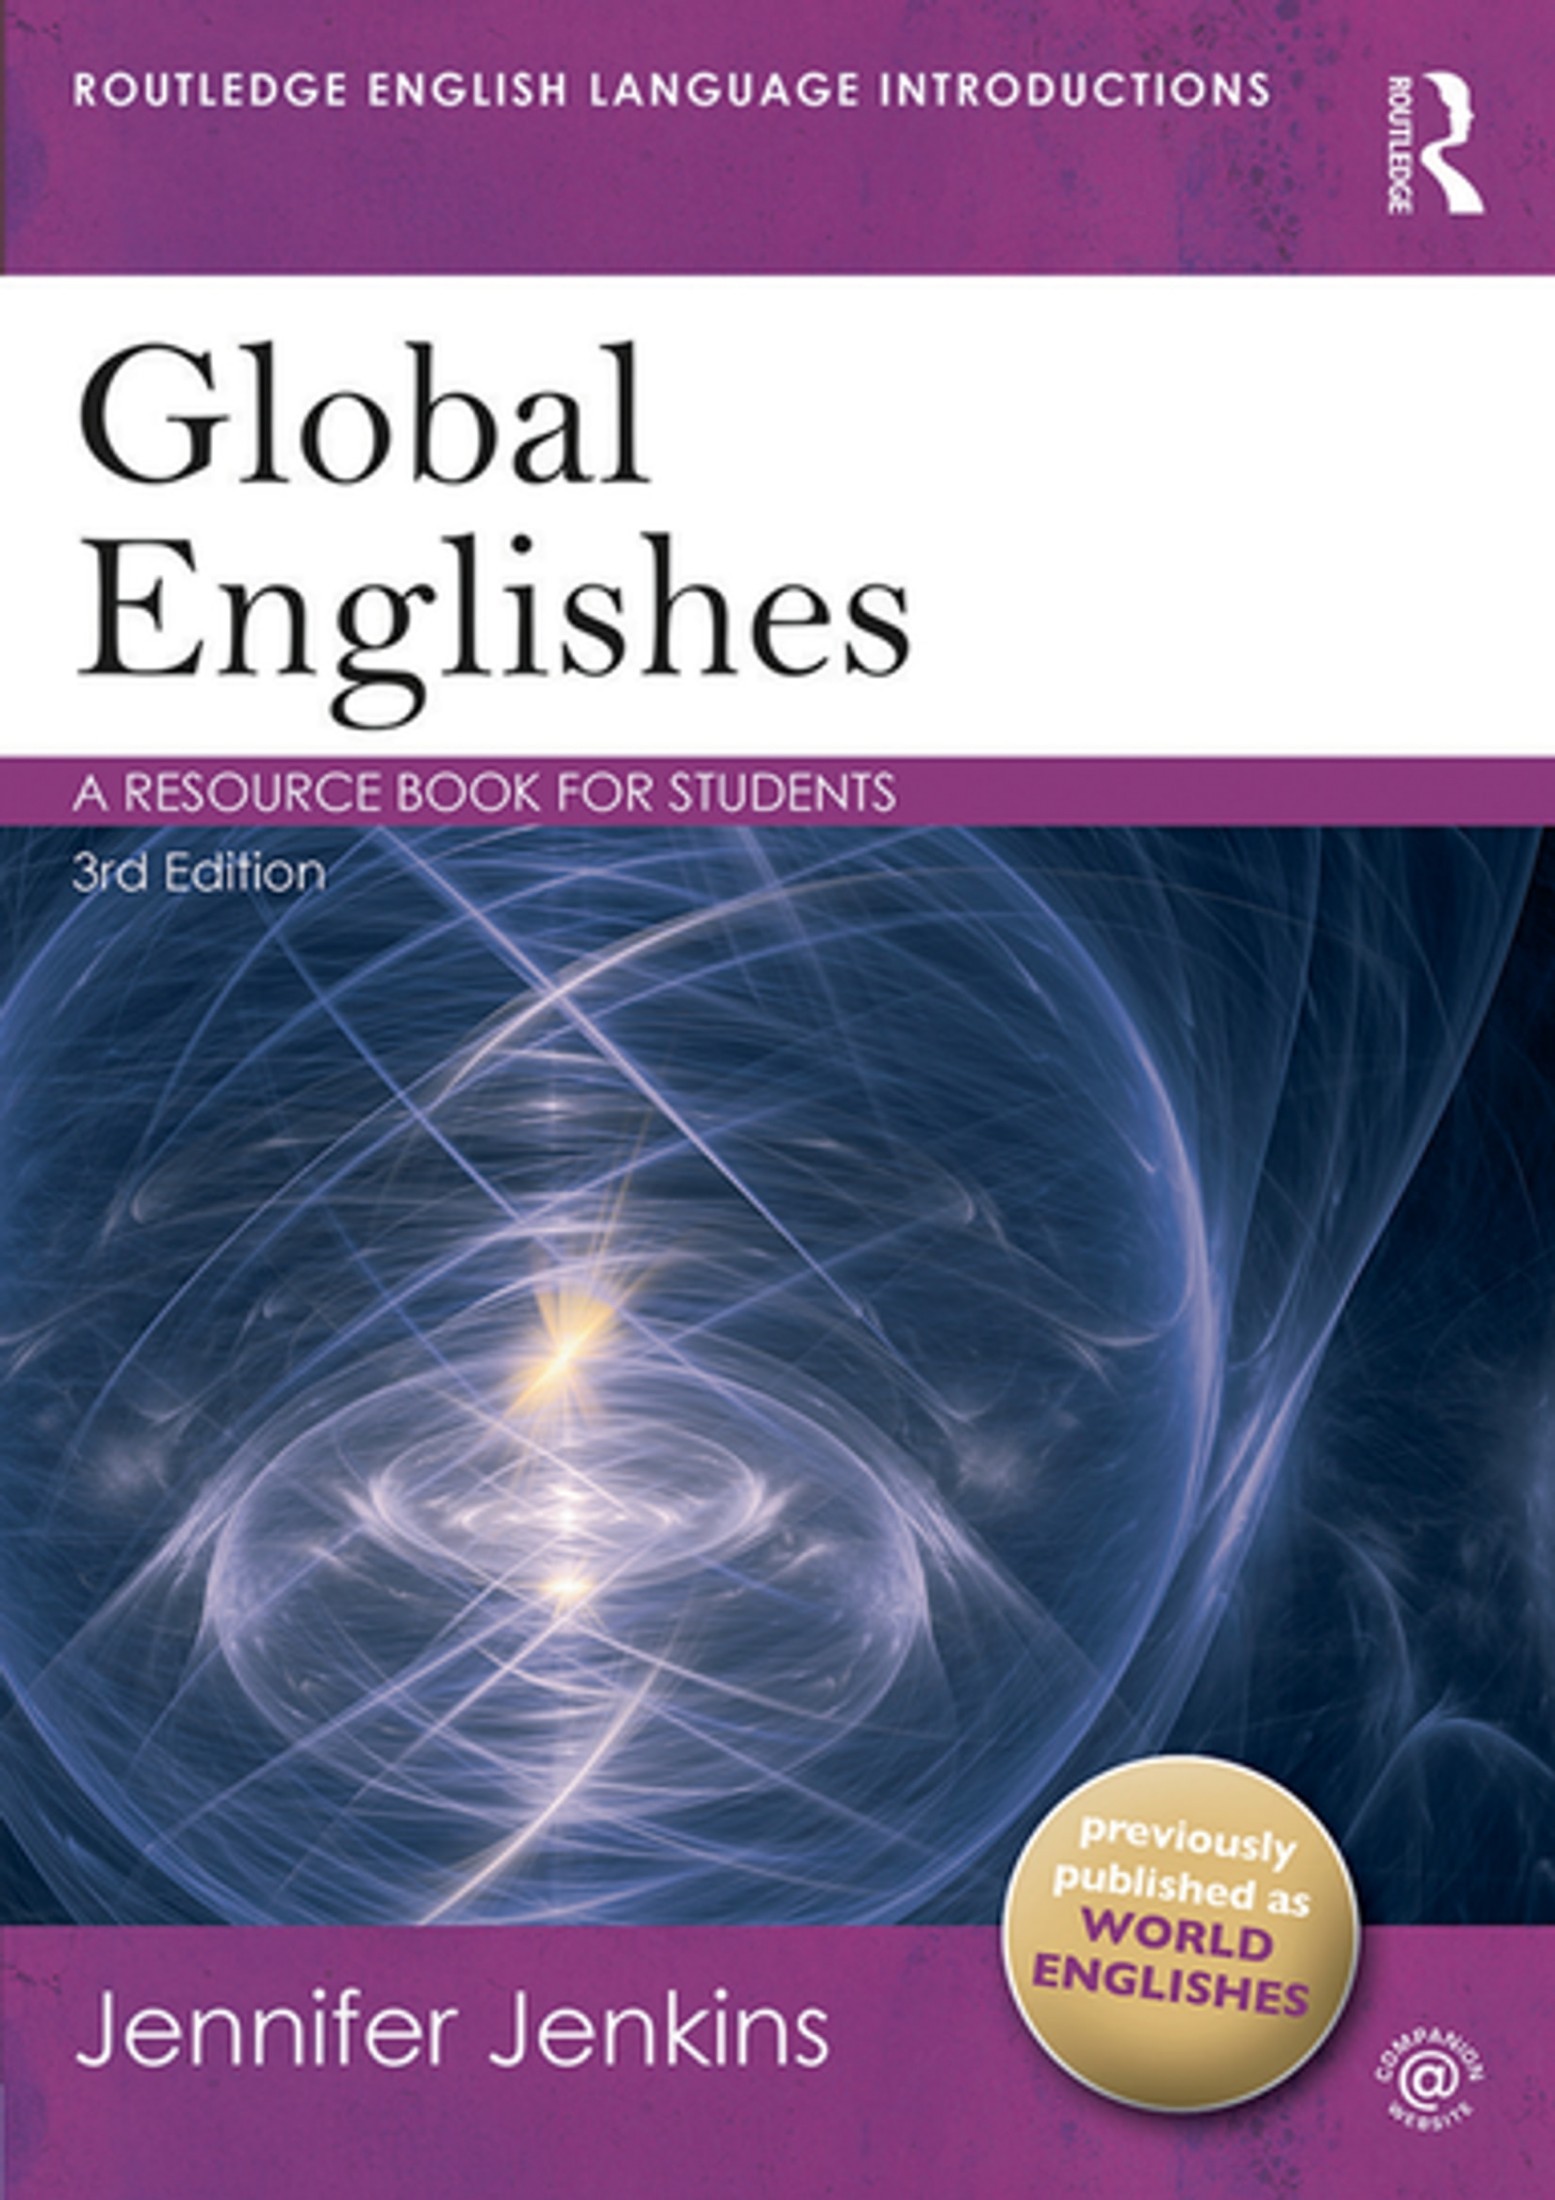 World Englishes: A Resource Book for Students